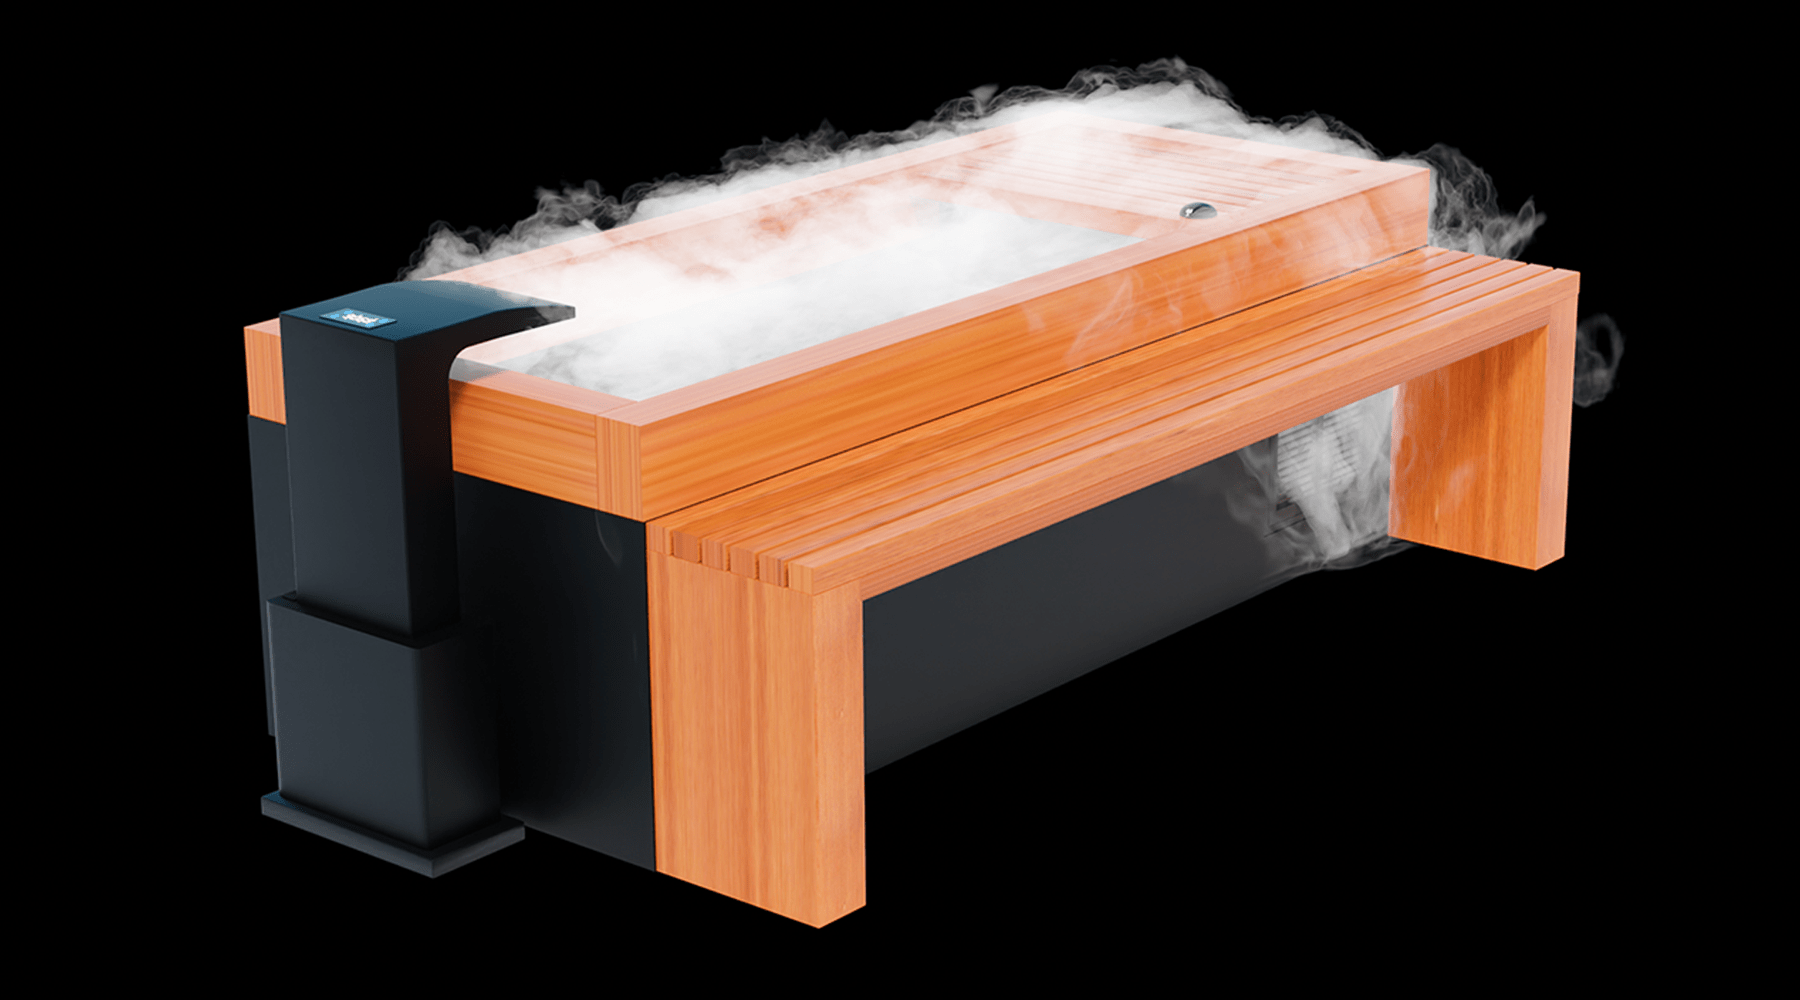 Medical Breakthrough - Frozen 6 Cold Plunge - Bar Counter & Heavy Duty Step / Essential Oil Infuser & Steam Generator